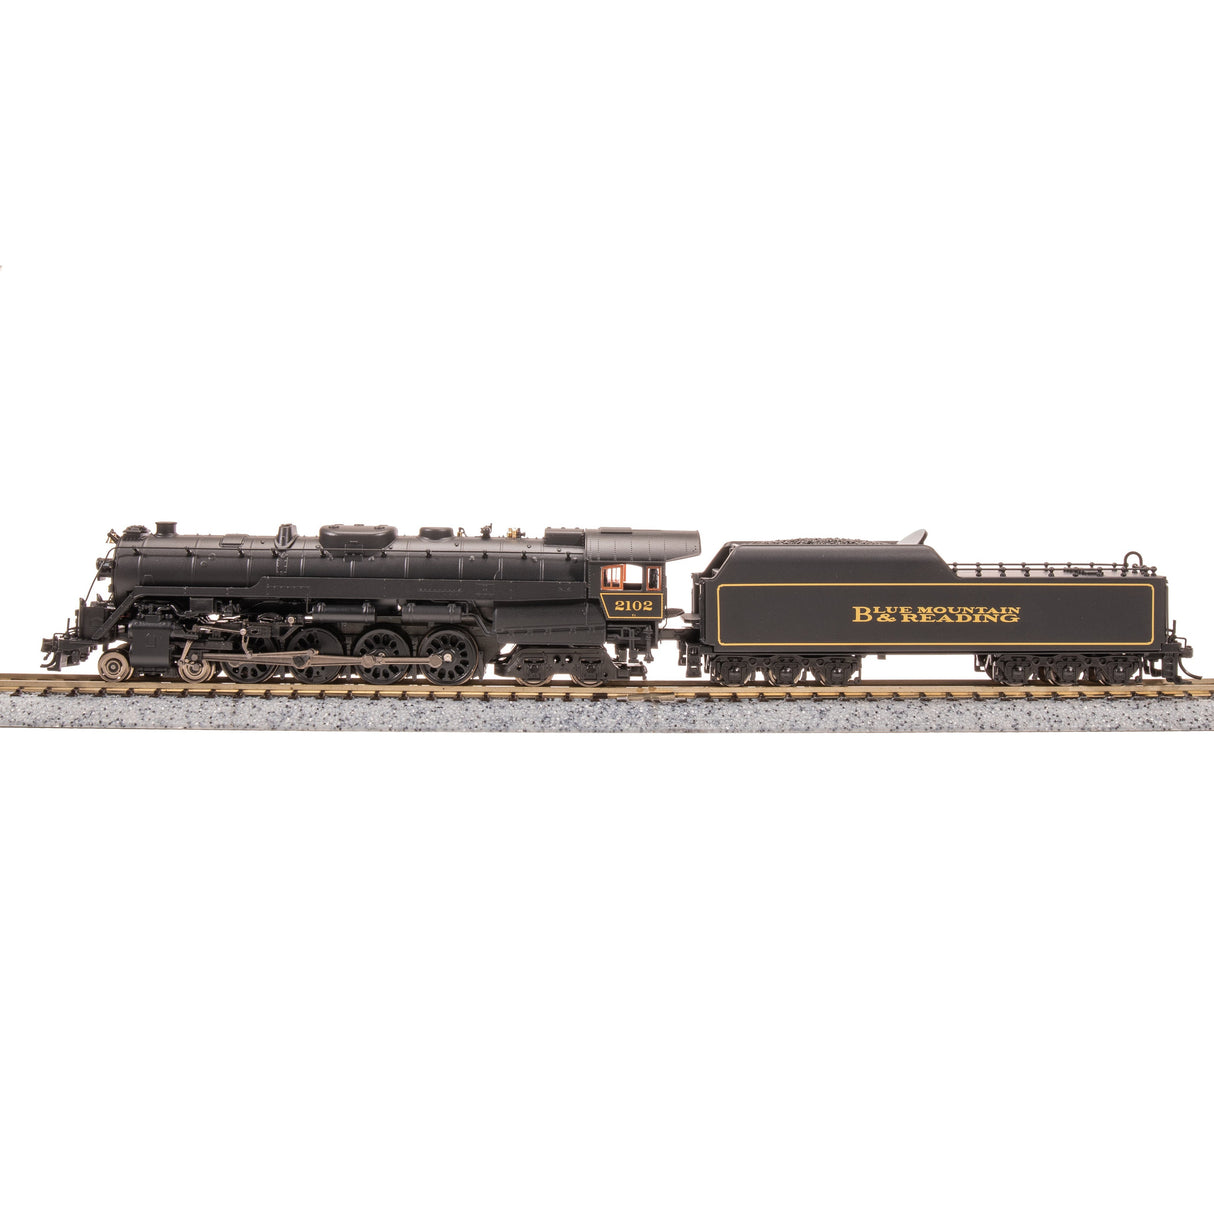 Broadway Limited N Scale Reading T-1 4-8-4 Steam Locomotive Blue Mountain & Reading #2102/ DC